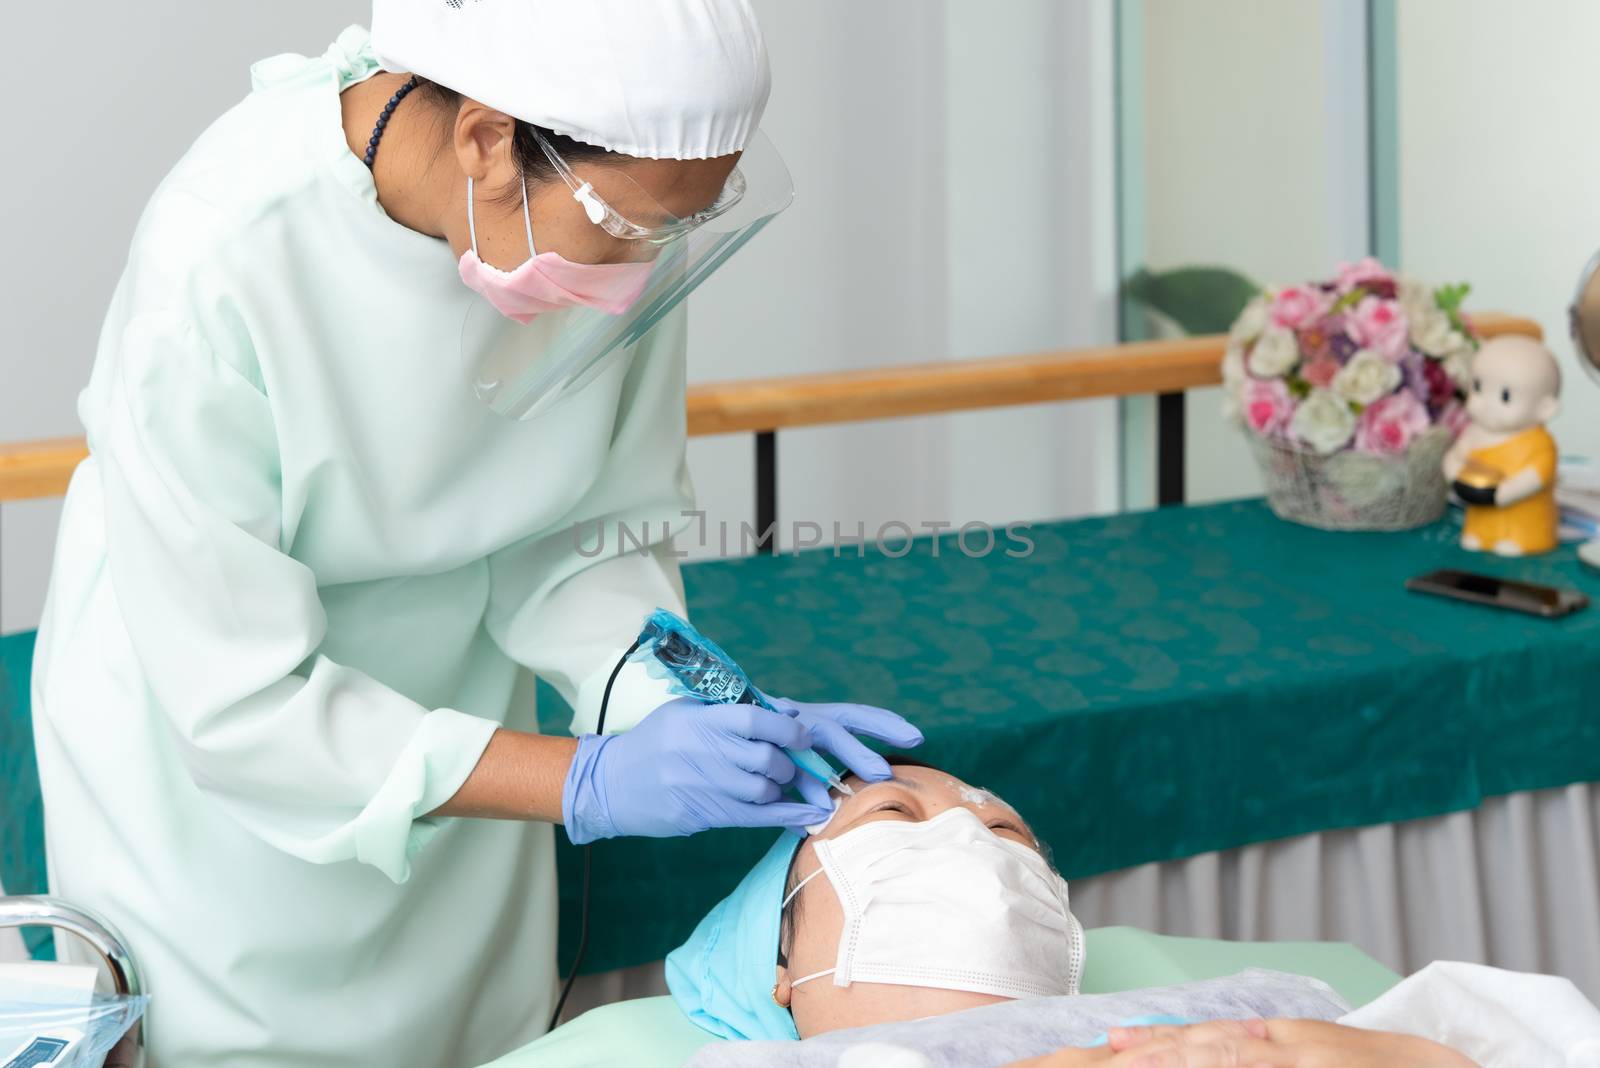 Bangkok, Thailand - May 30, 2020 : Unidentified Asian woman eyebrow tattooing by specialist in Eyebrow tattoo or embroidery clinic use COVID-19 prevention policy protect by use mask and face shield